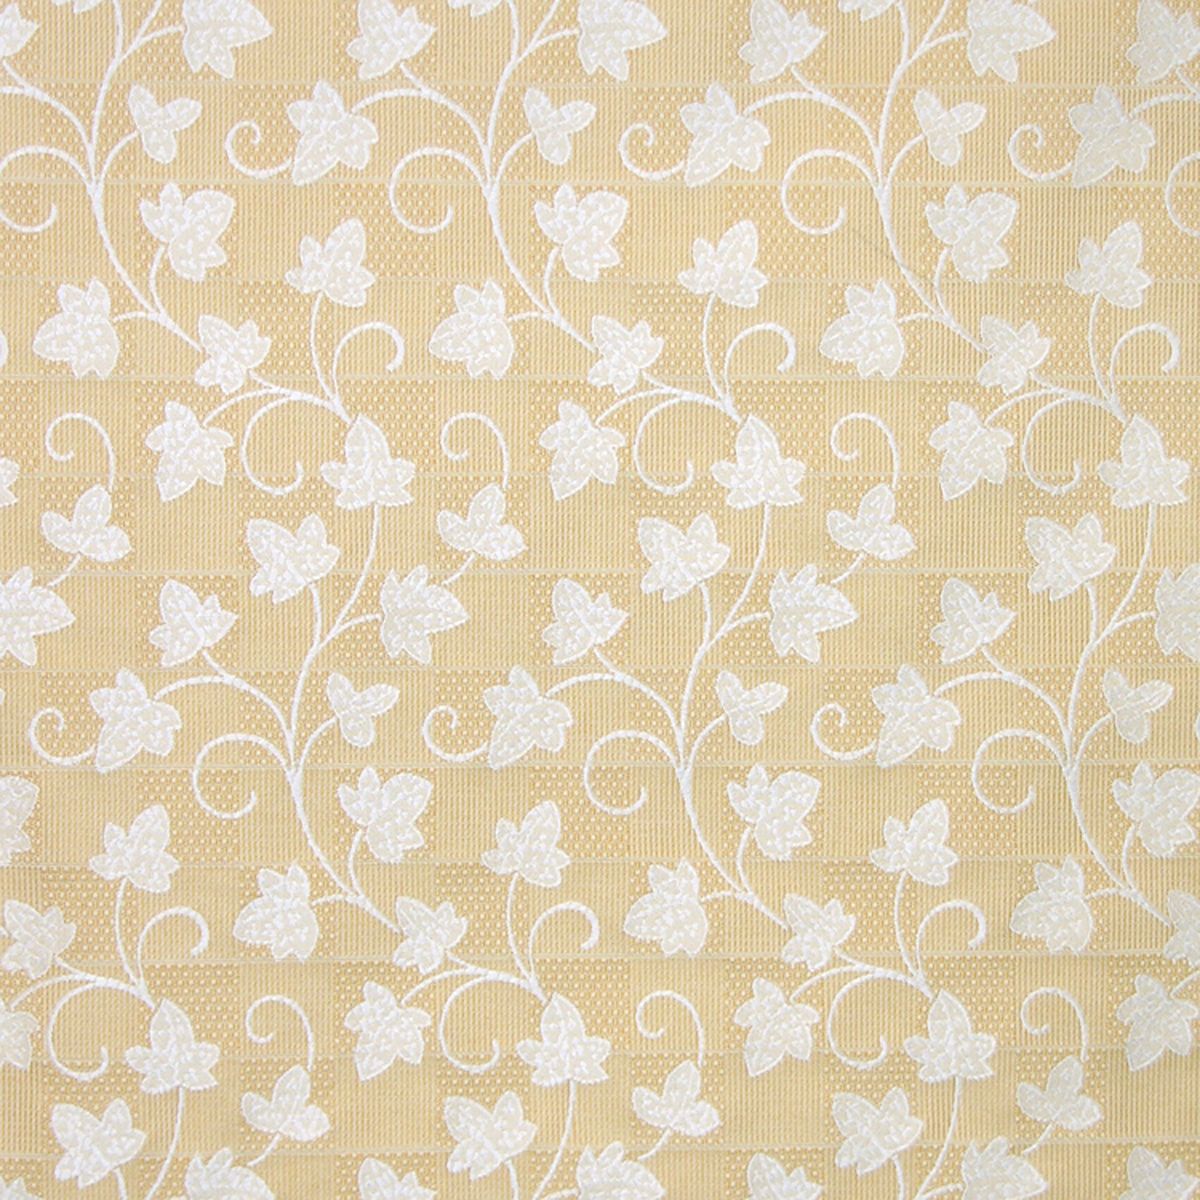 Ivy Cottage fabric in yellow color - pattern number GH 00048003 - by Scalamandre in the Old World Weavers collection